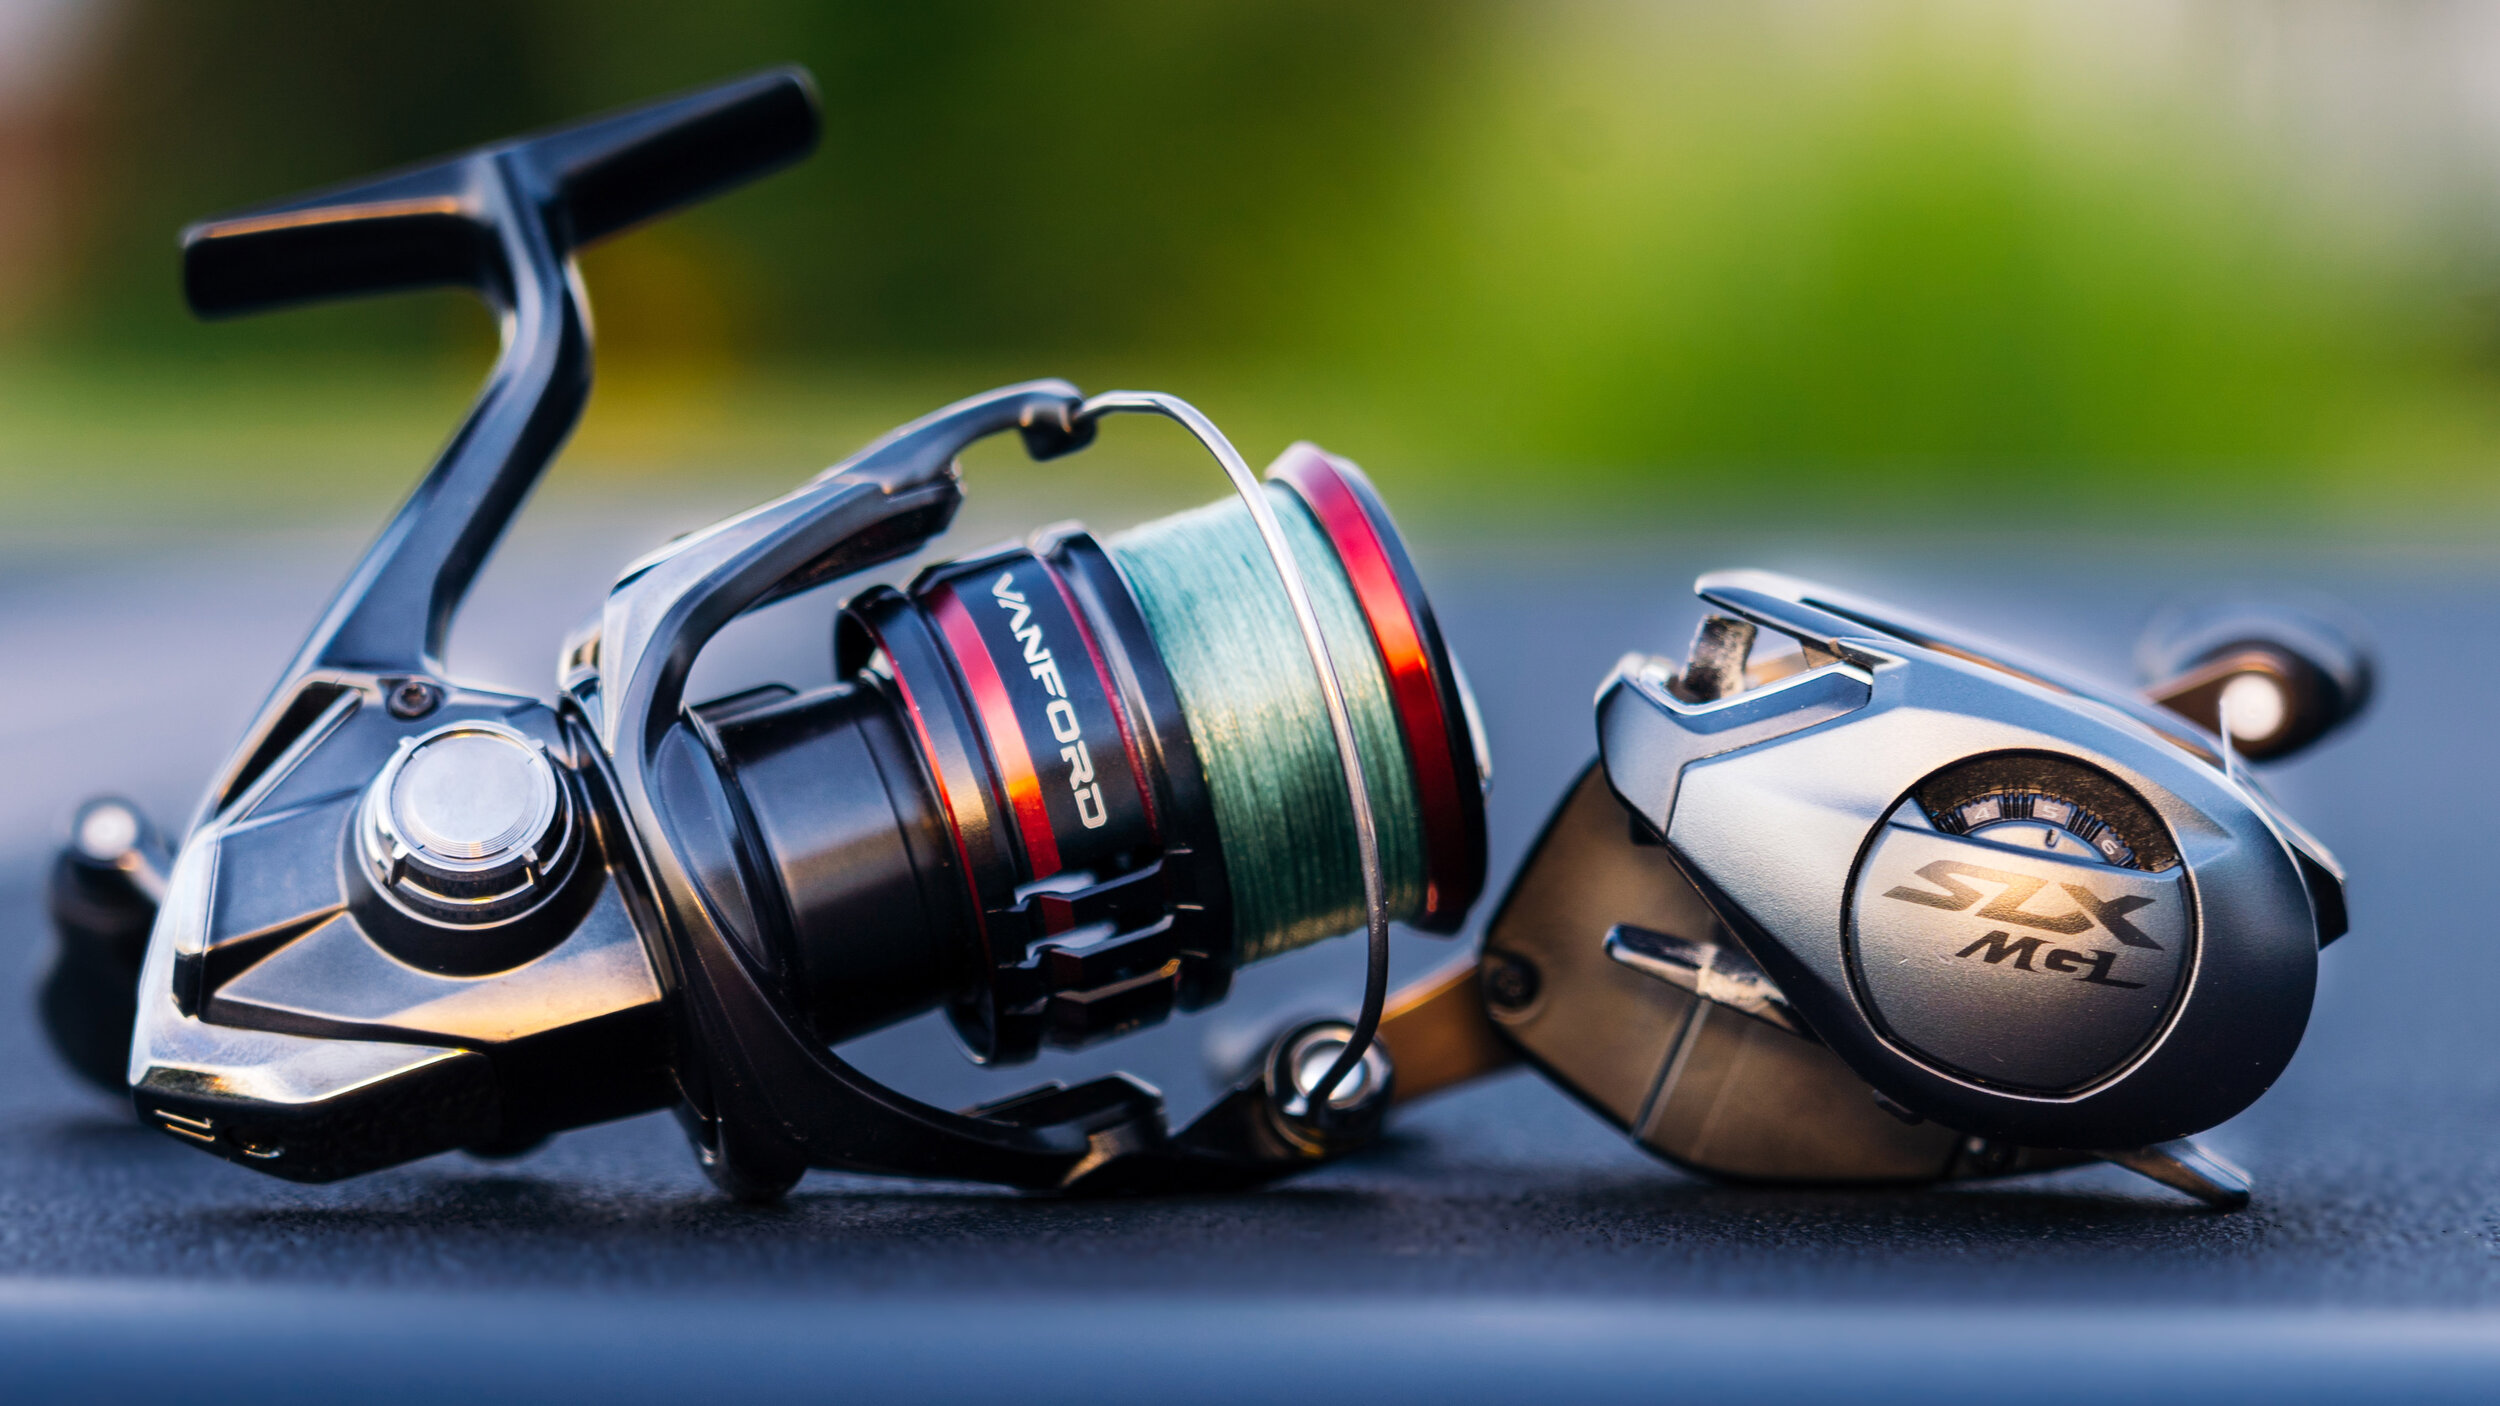 Summer Gear Review! New Tackle, Rods, Reels, ICAST 2020 New Releases! —  Tactical Bassin' - Bass Fishing Blog